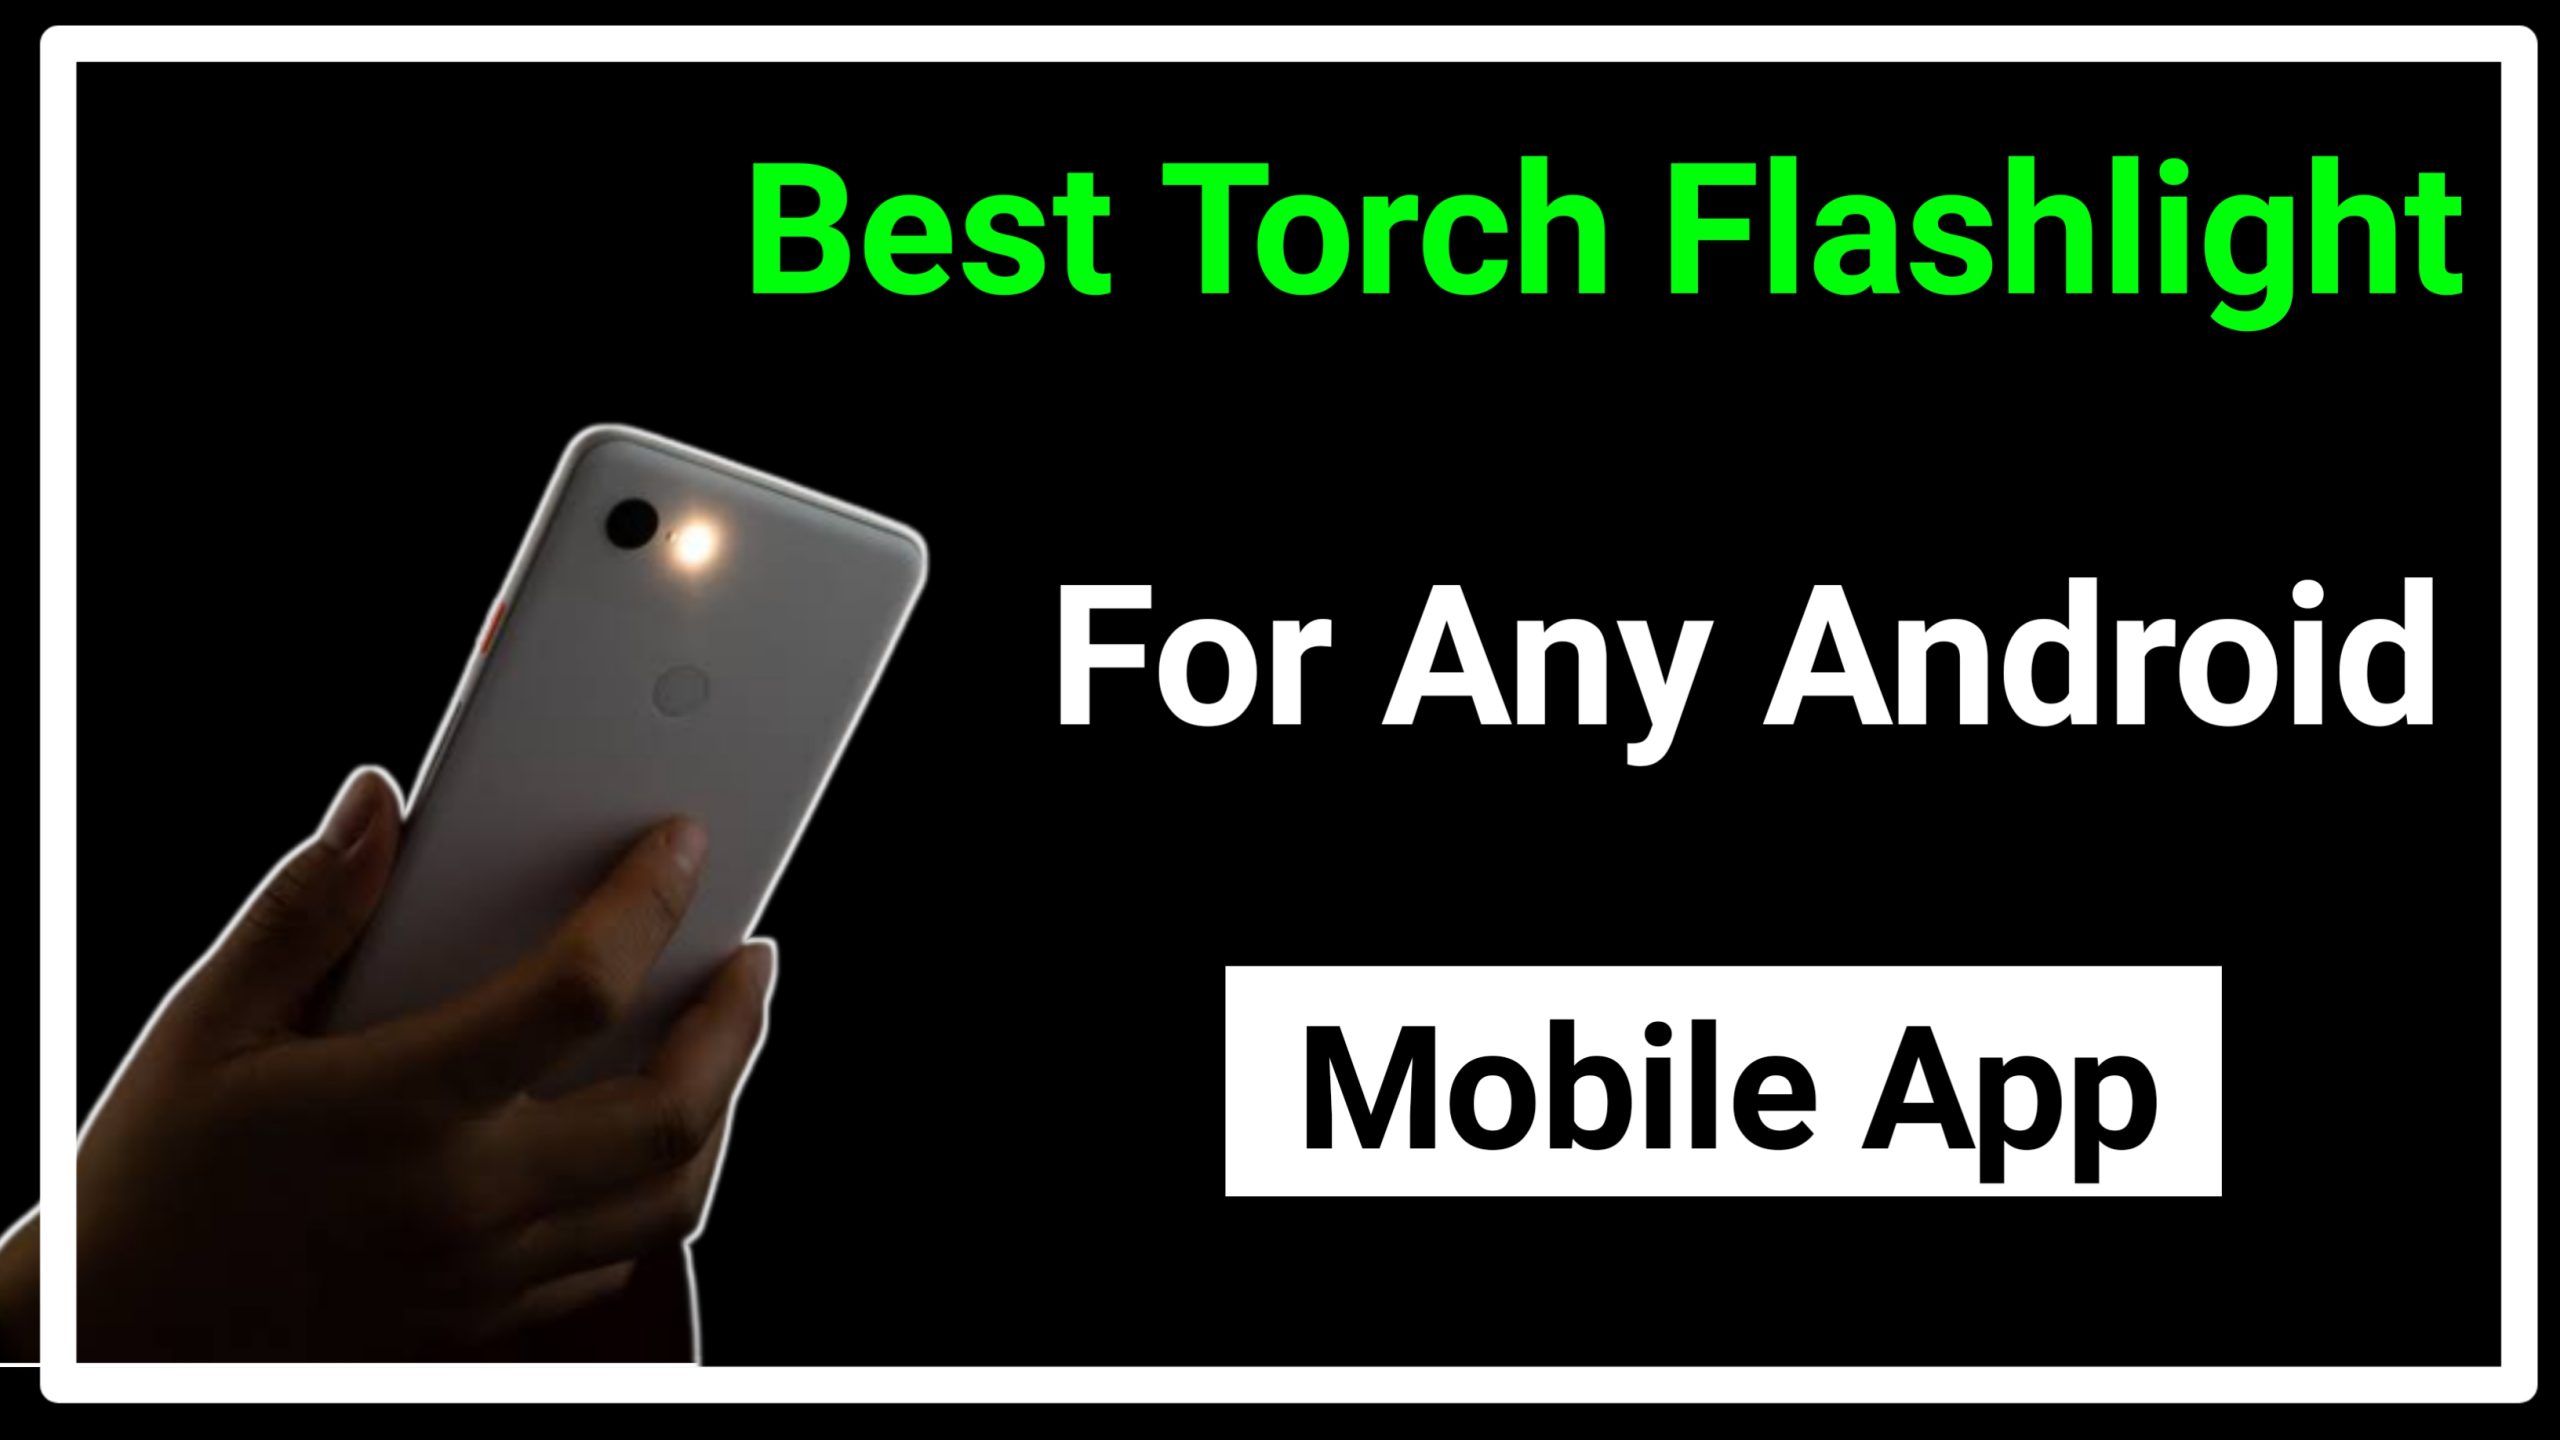 Best Torch Flashlight For Android Mobile 